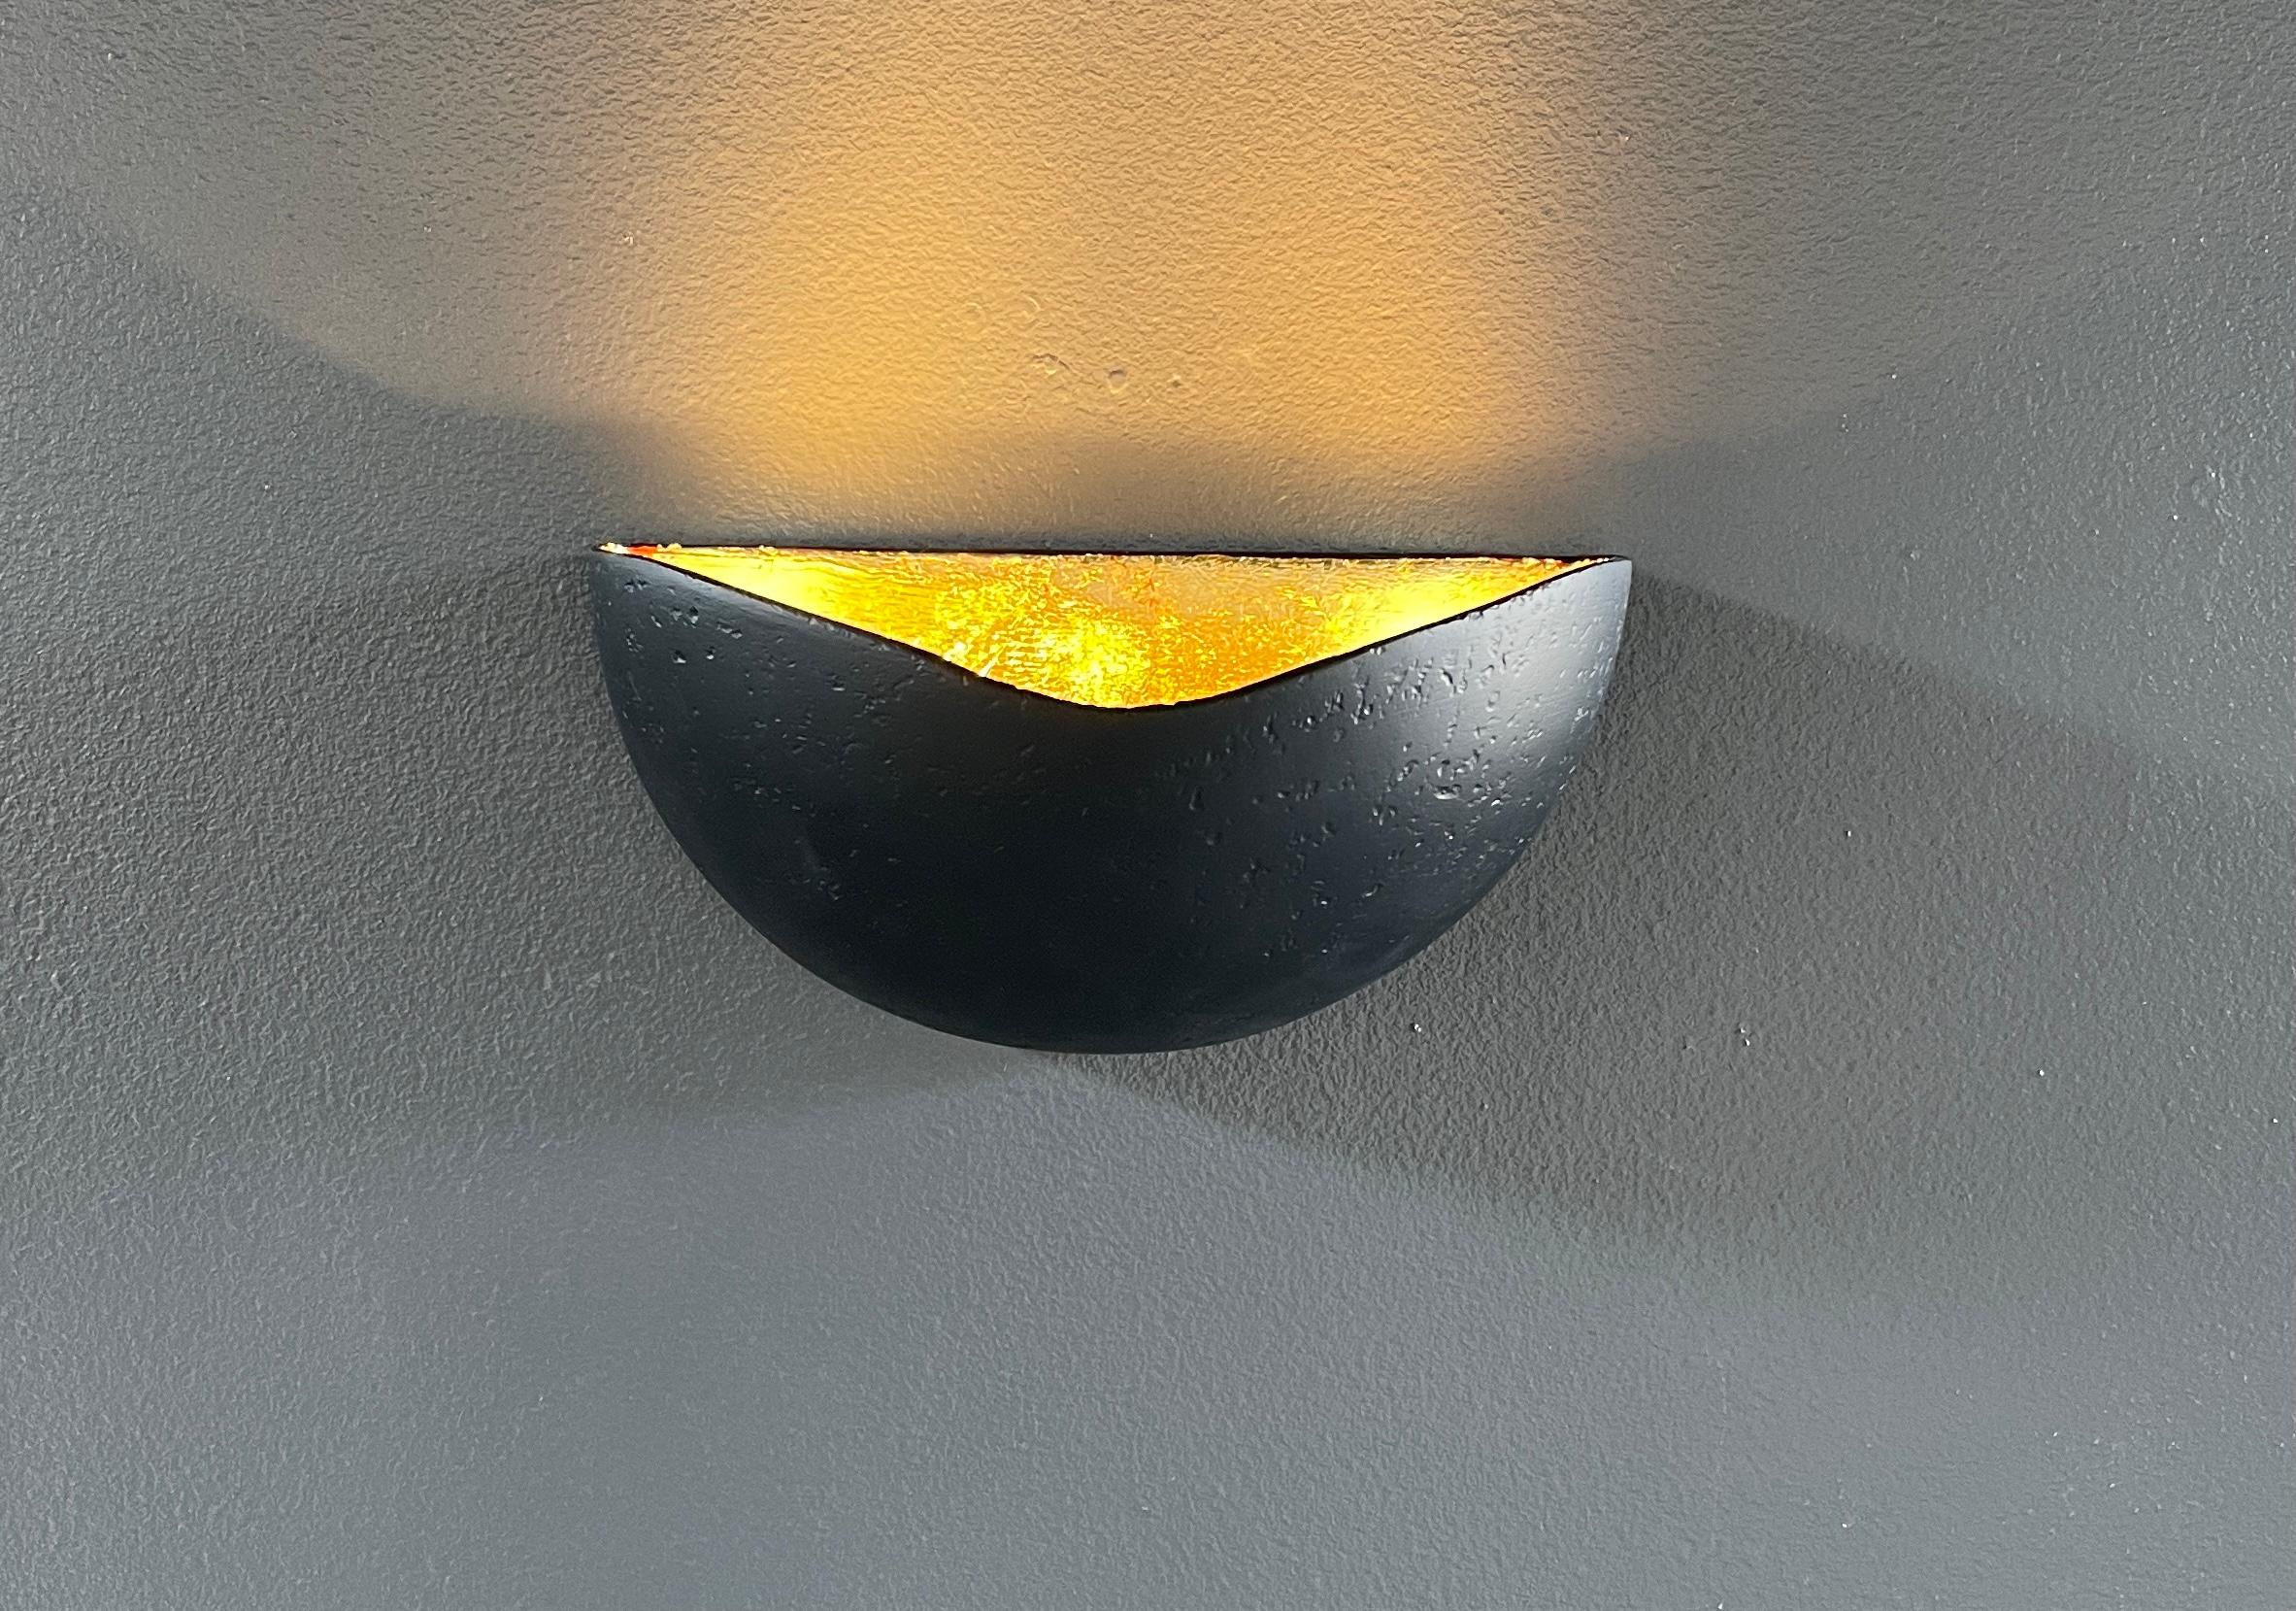 Stainless Steel St Germain Sconce, Matte Black with Gold Leaf, by Bourgeois Boheme Atelier For Sale